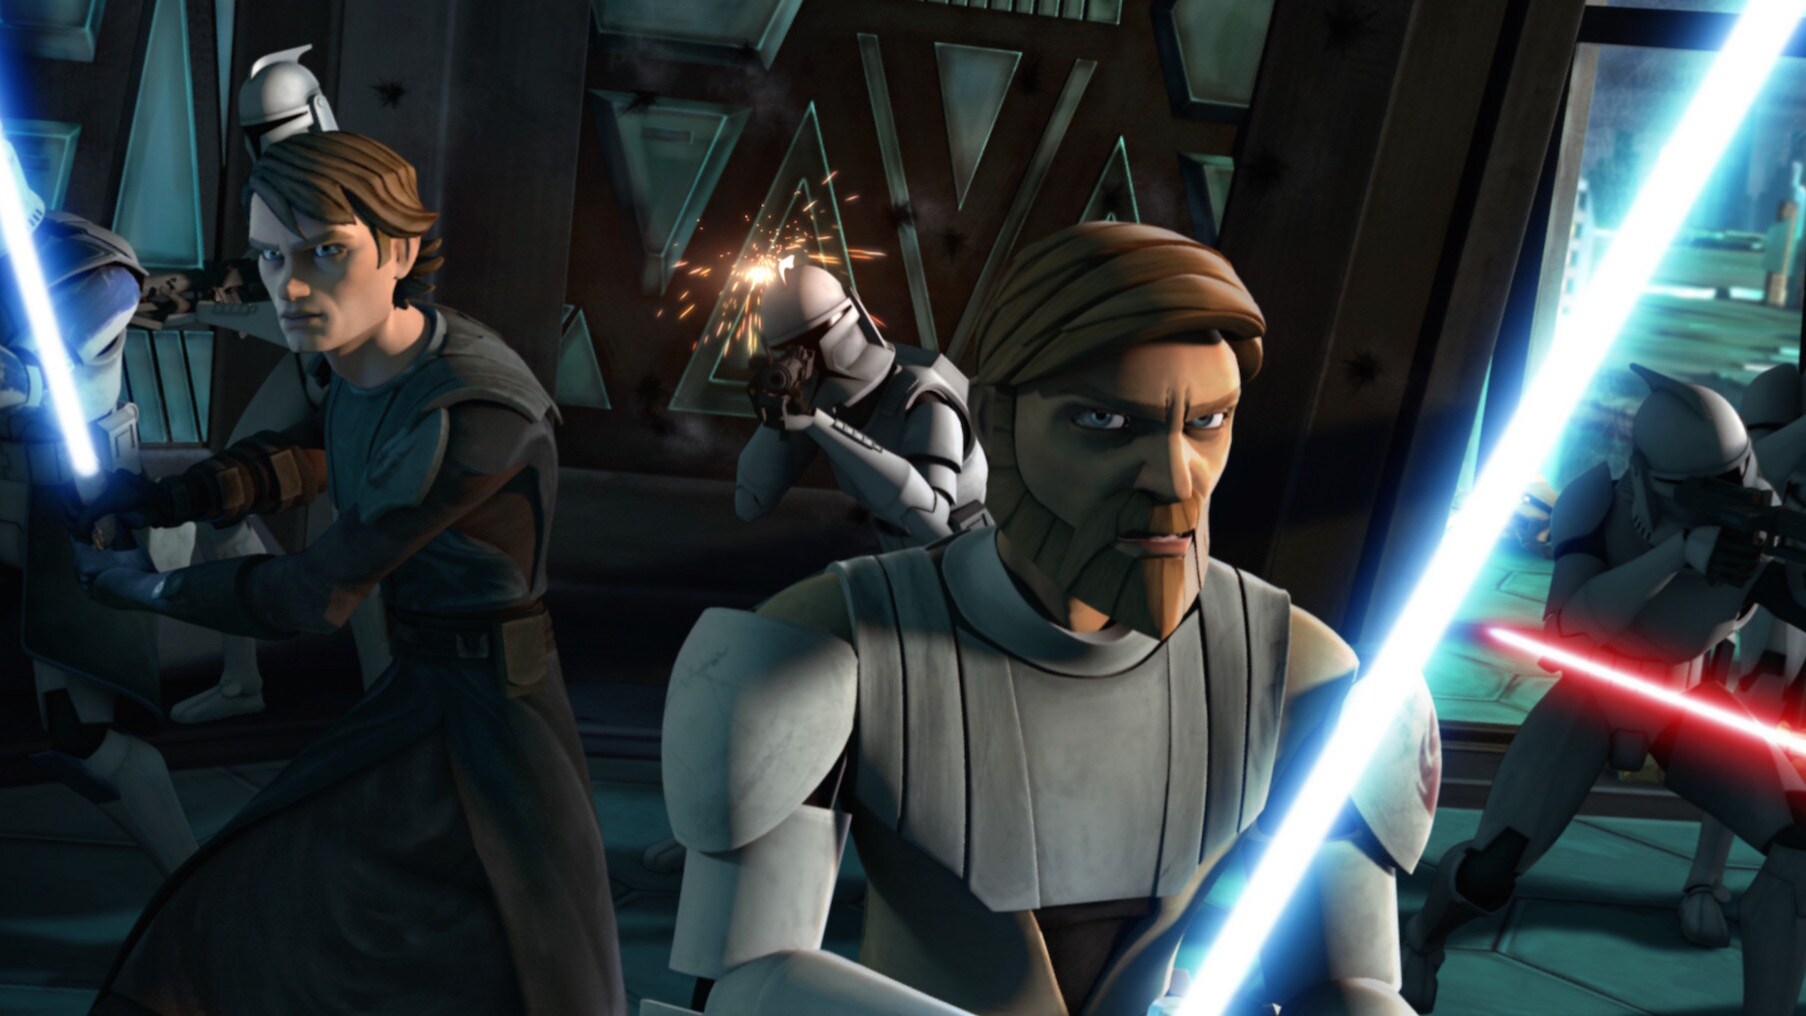 Poll: What Is the Best Episode of Star Wars: The Clone Wars?